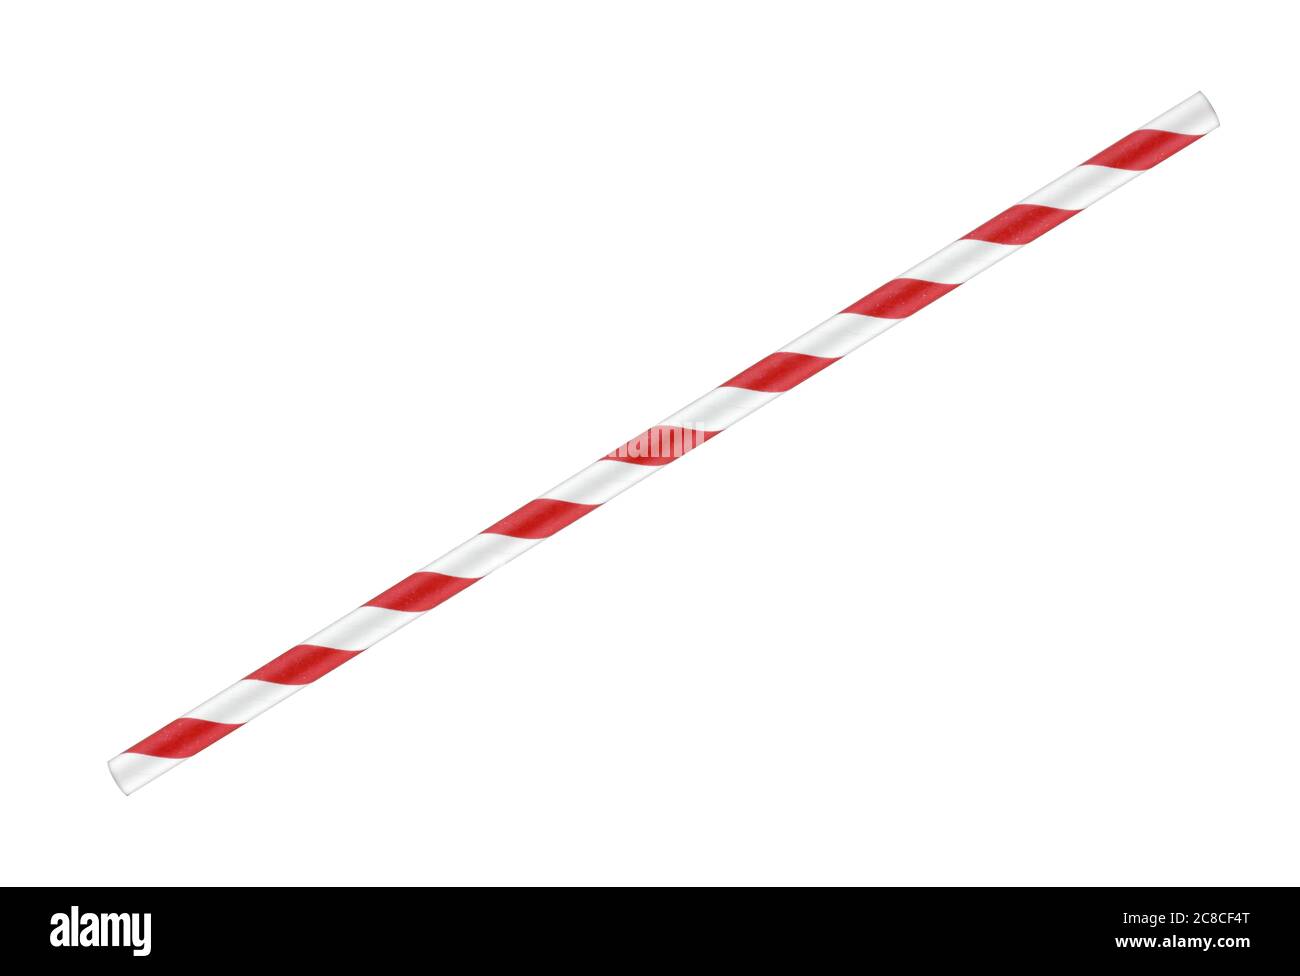 https://c8.alamy.com/comp/2C8CF4T/red-and-white-paper-drinking-straw-on-white-with-clipping-path-2C8CF4T.jpg